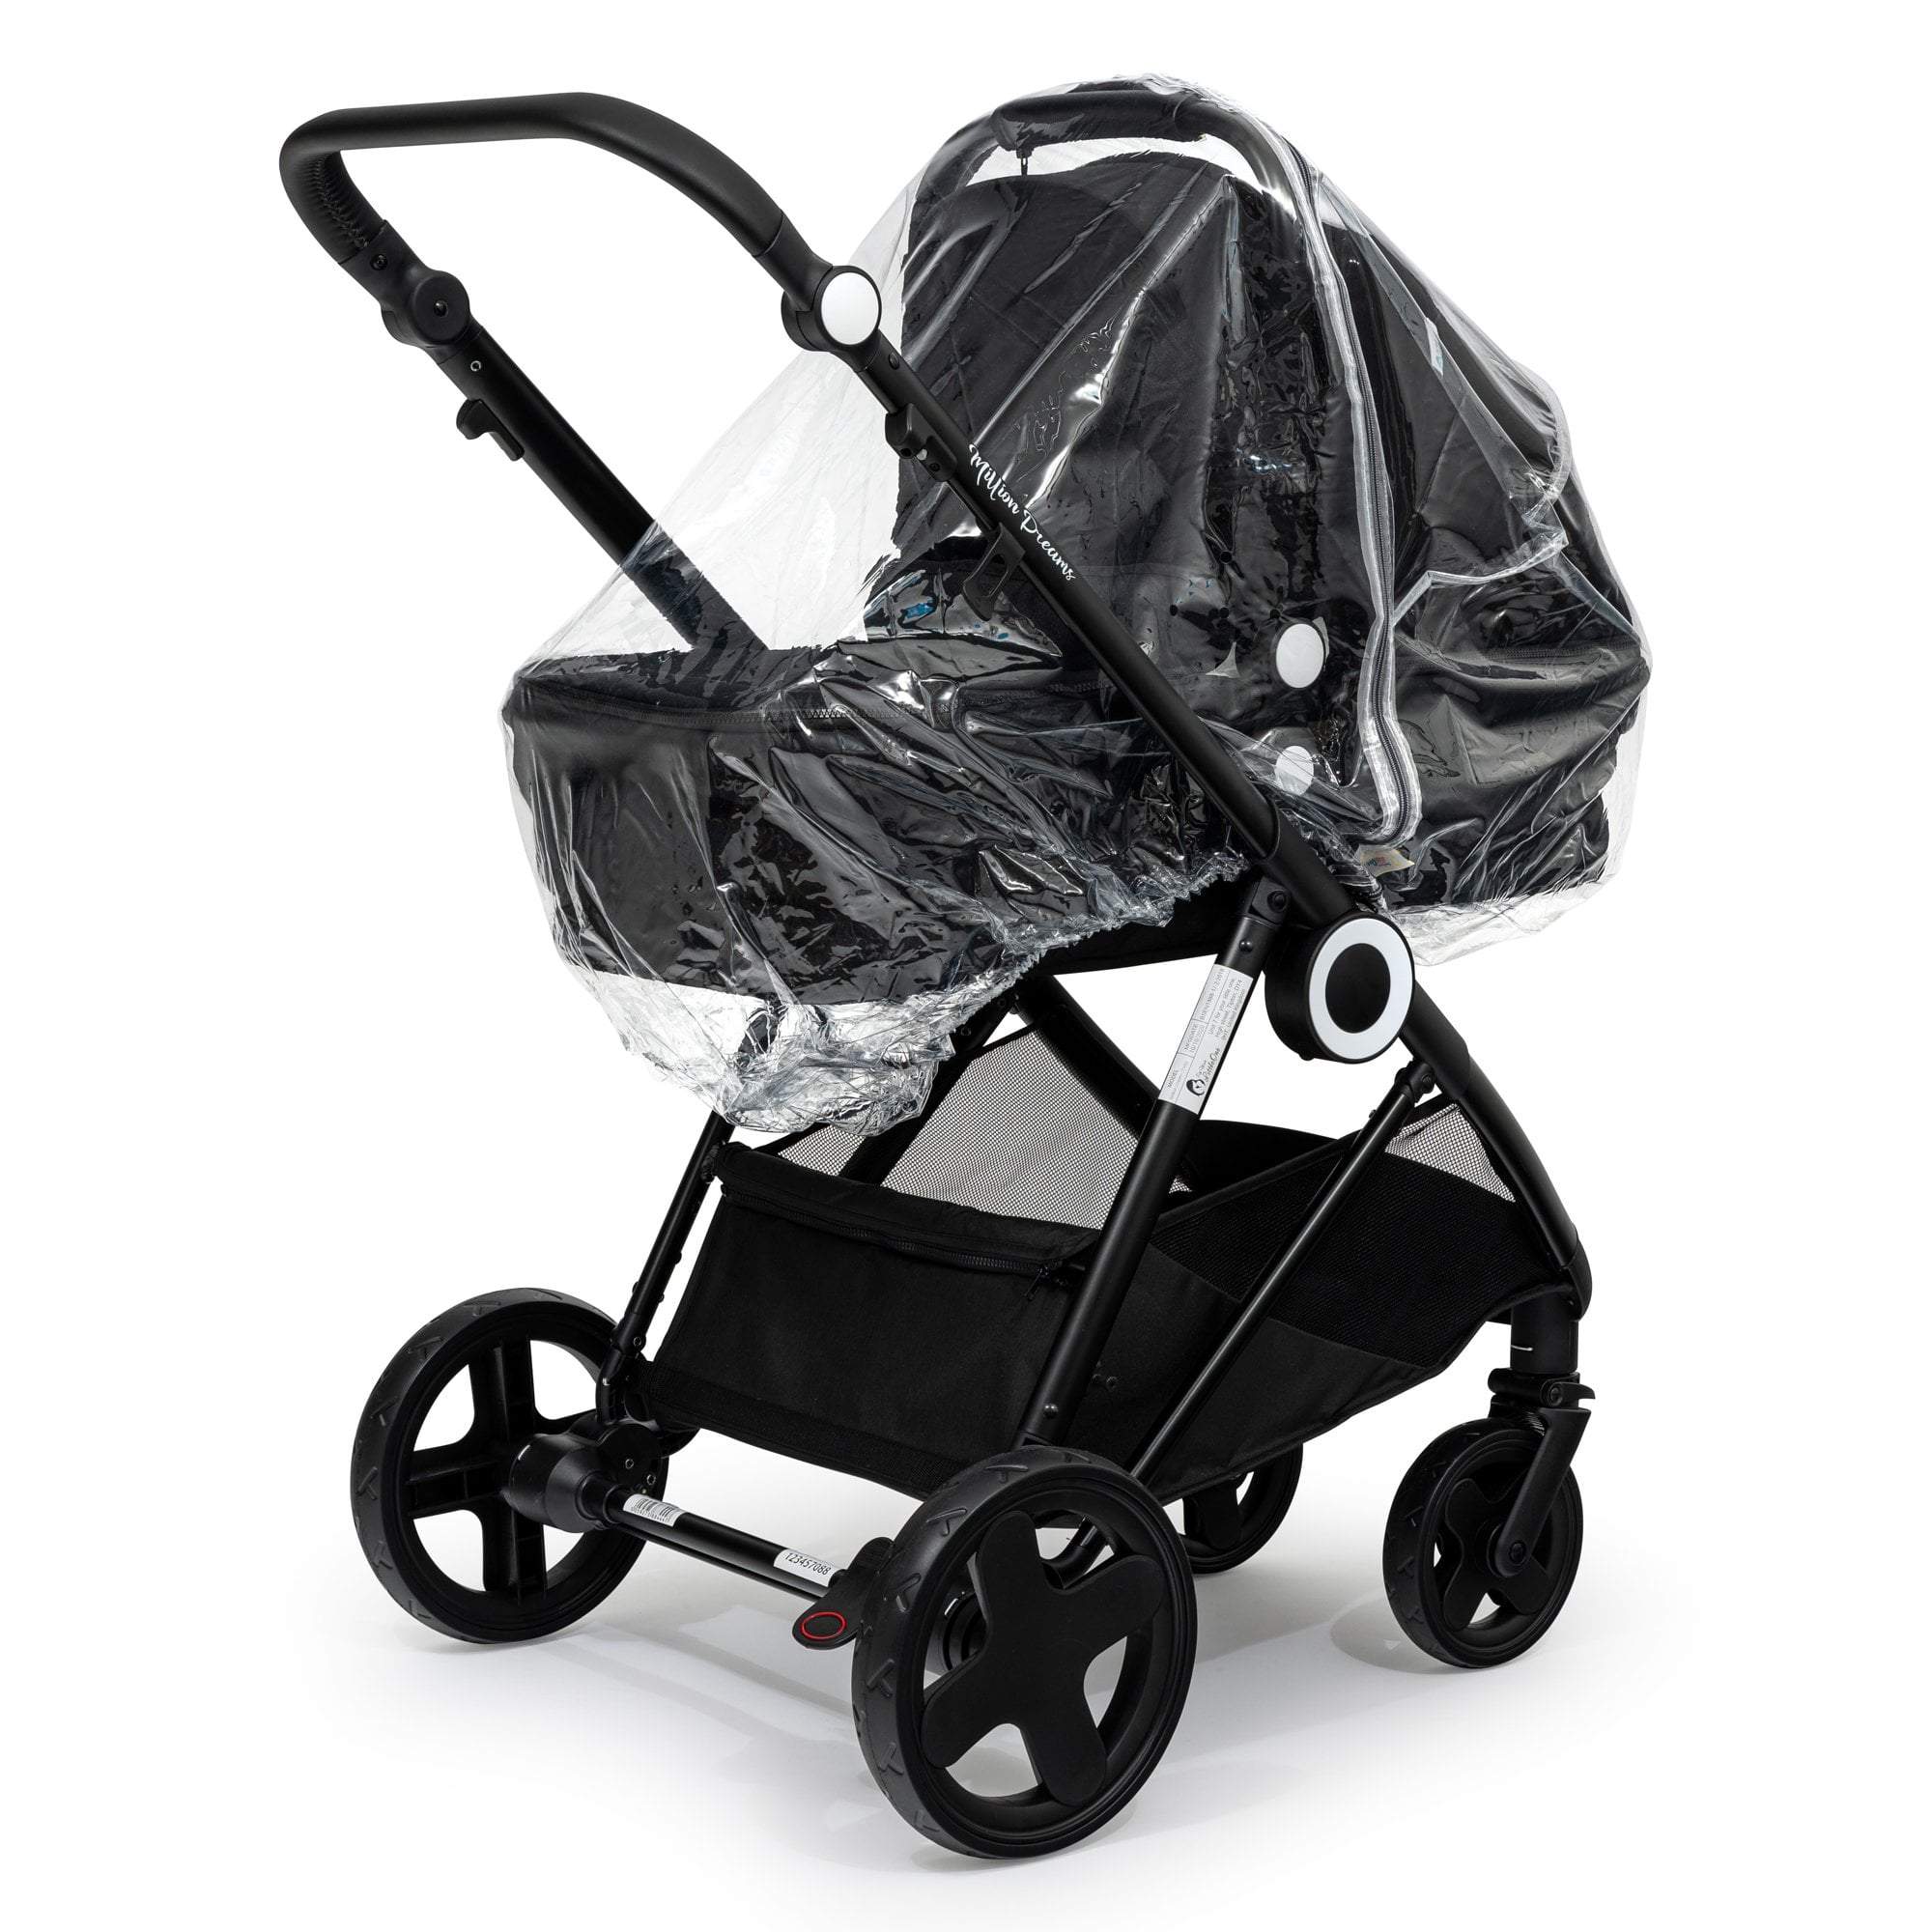 Carrycot Raincover Compatible With Mountain Buggy - Fits All Models - For Your Little One